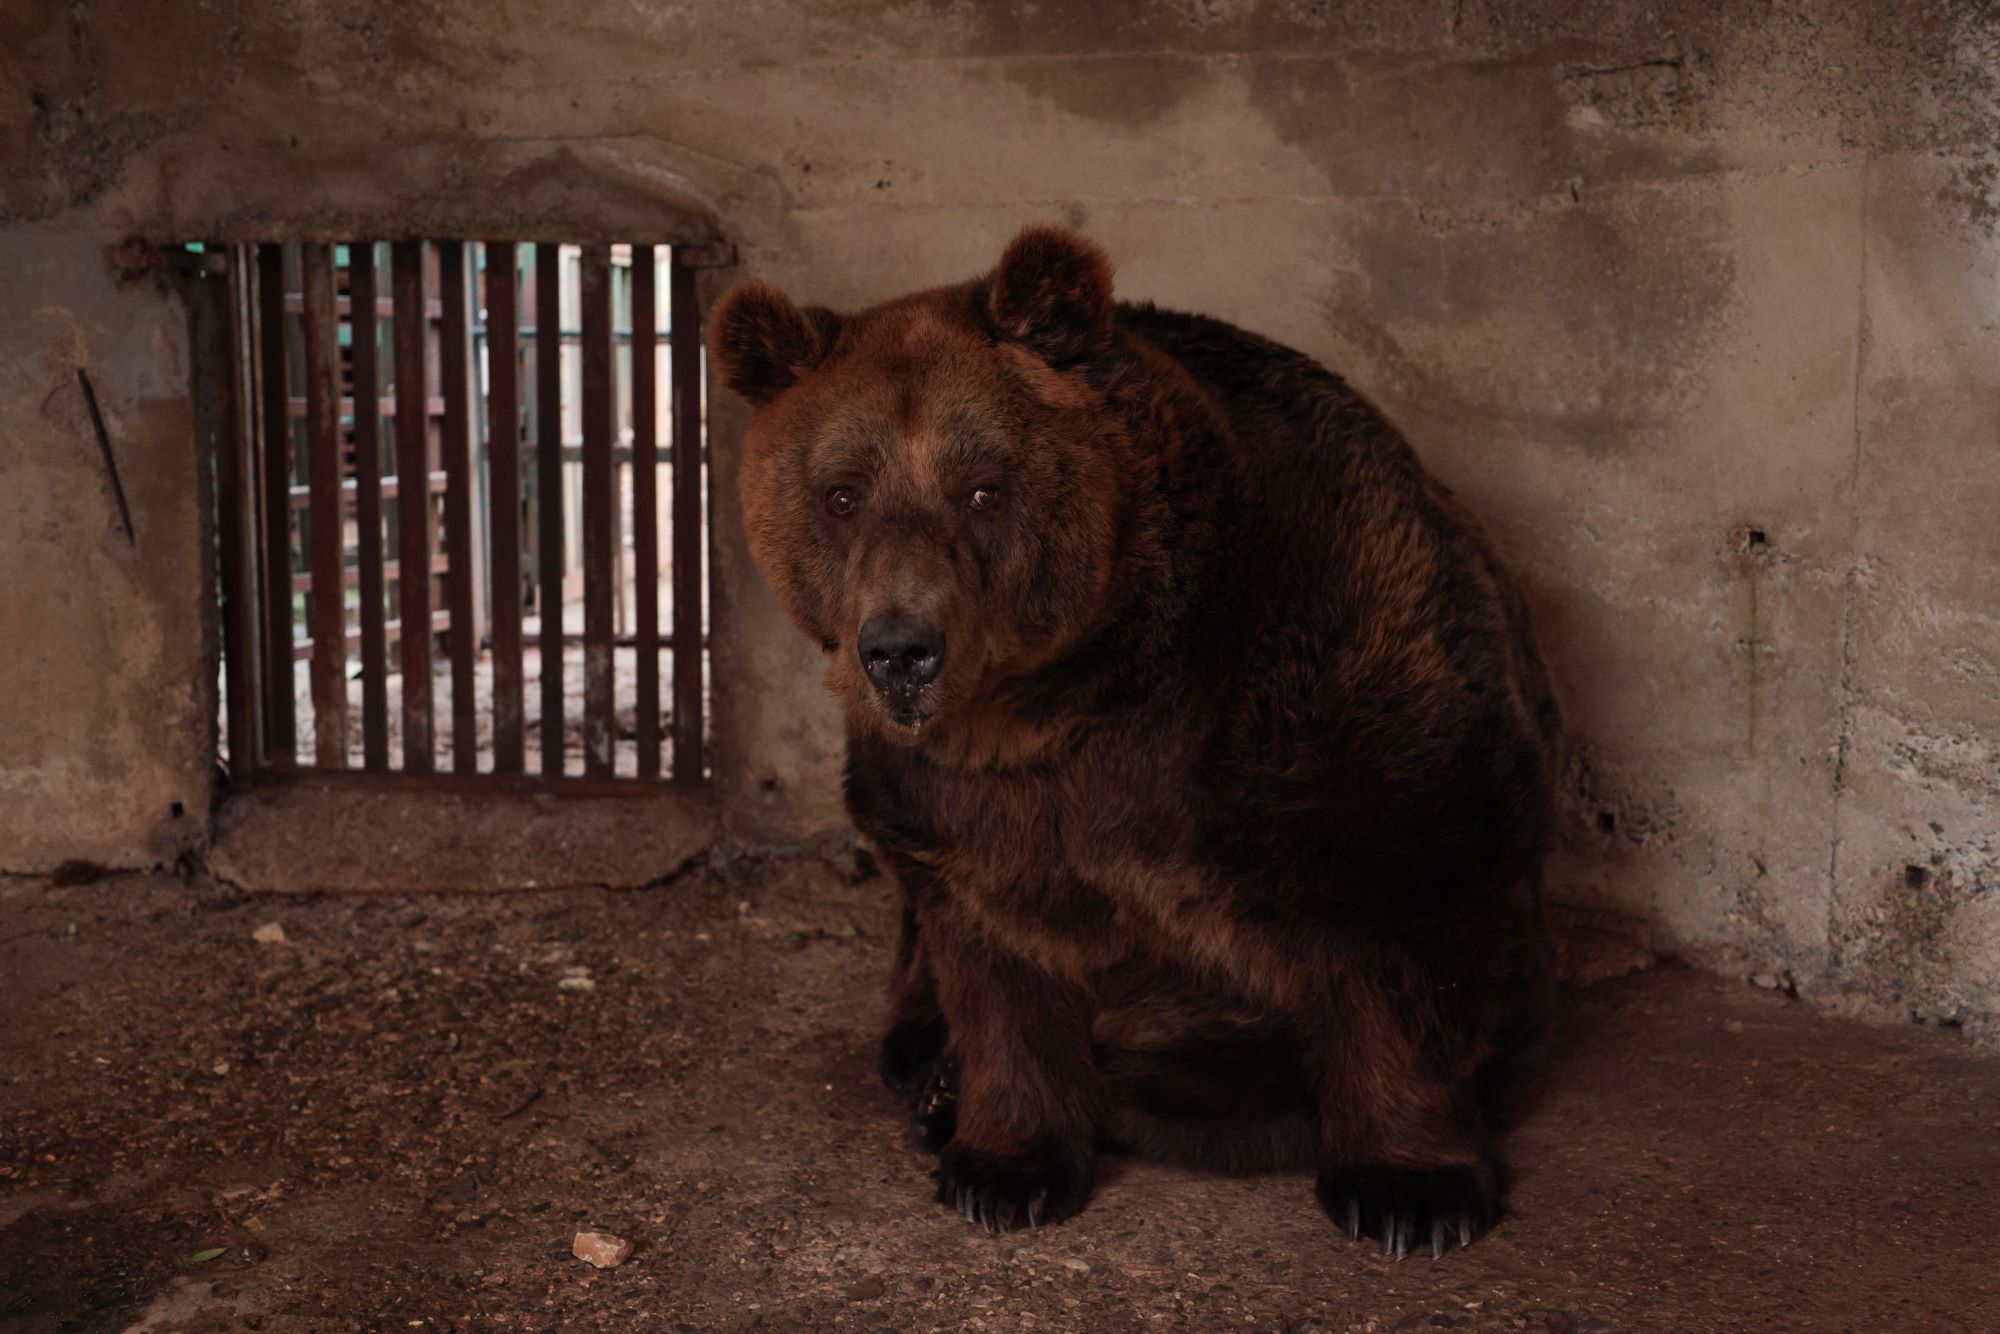 Italy: Execution of bear blamed for death of 26-year-old man ‘postponed’